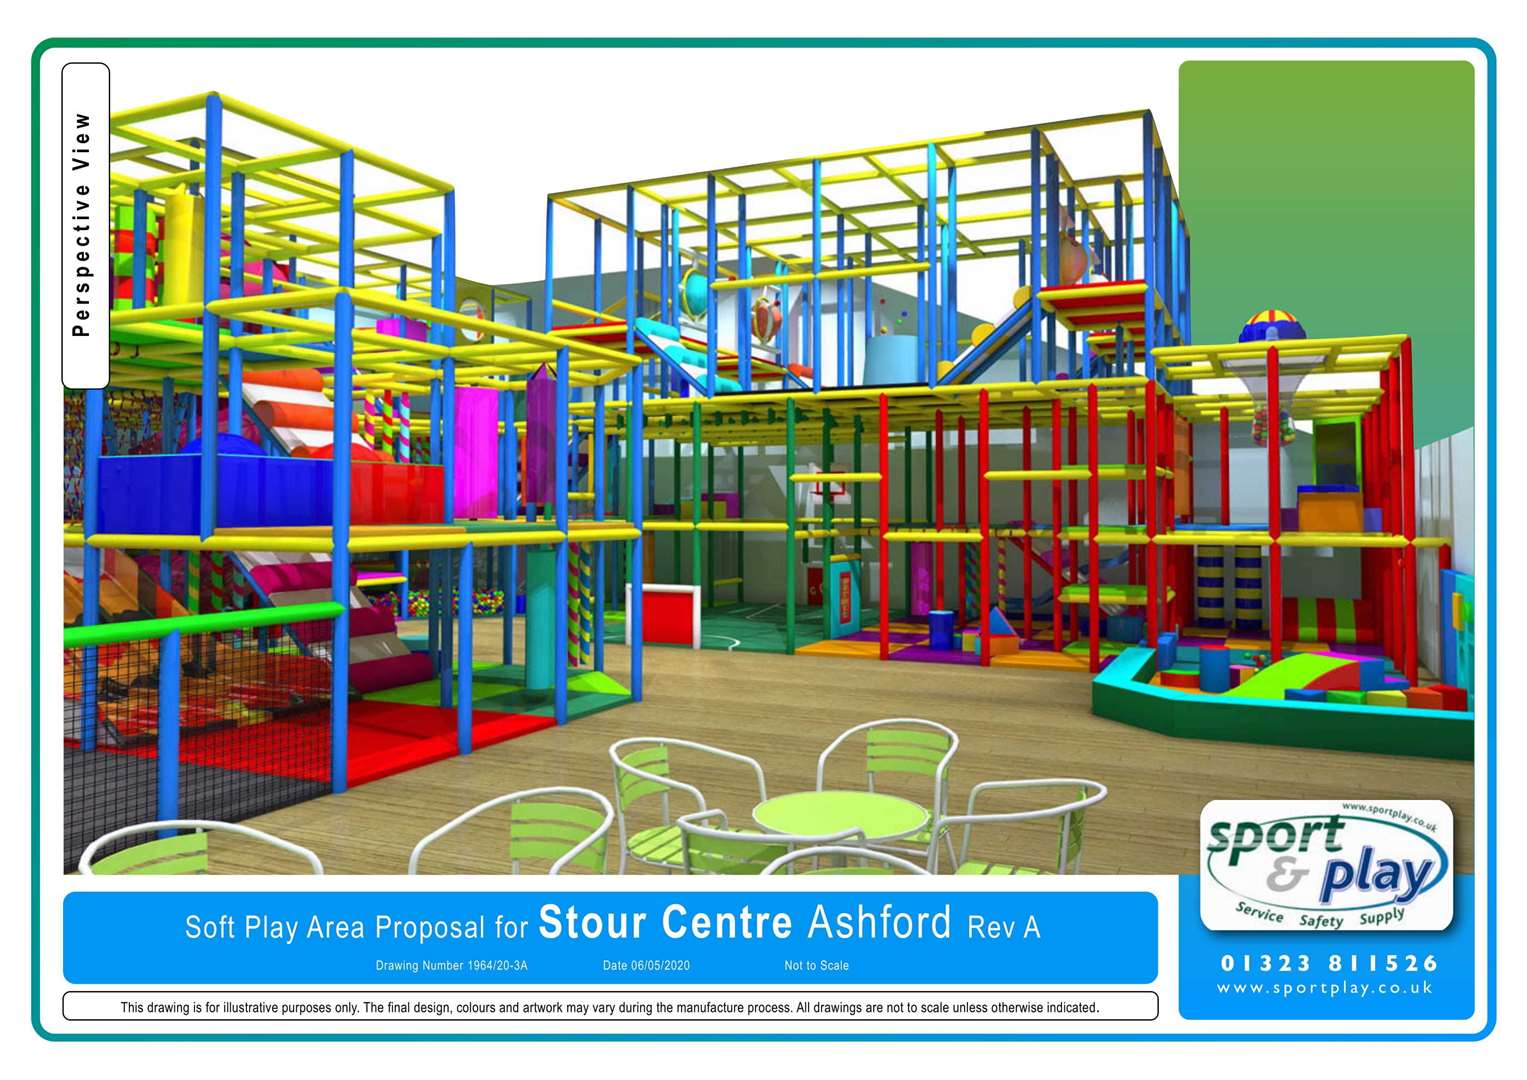 A multi-leveled play area is also being introduced to the Stour Centre